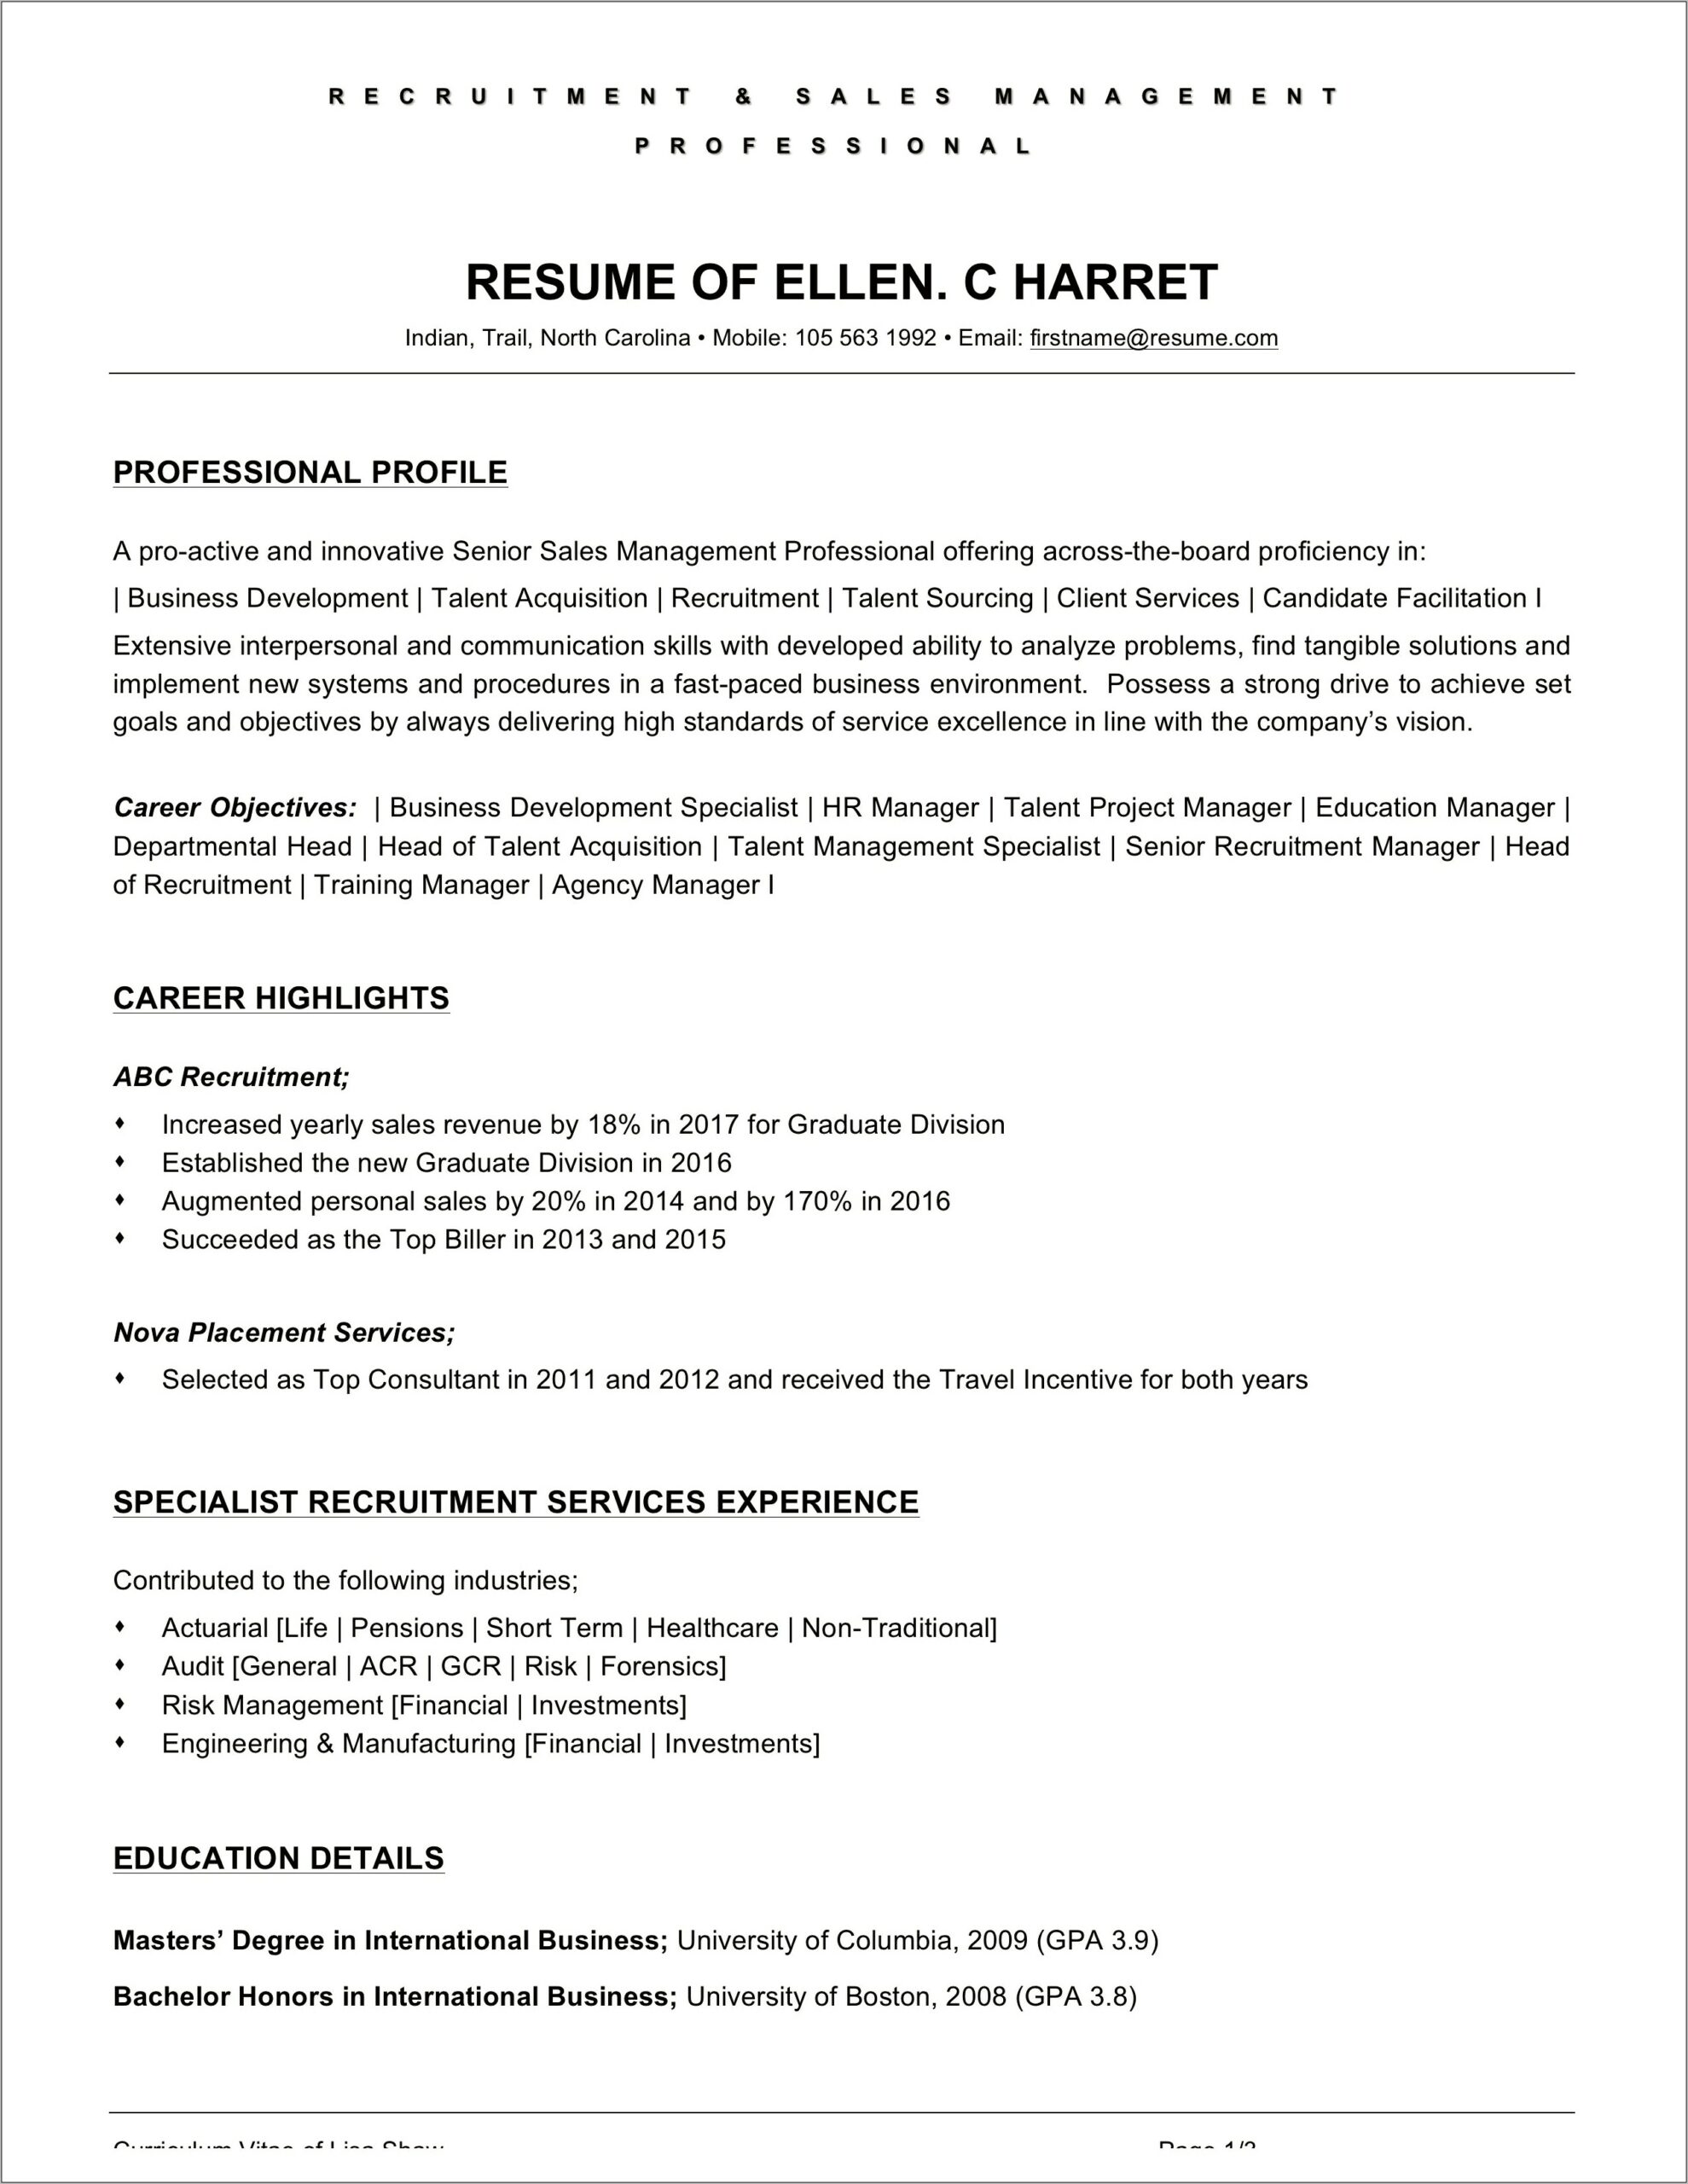 Resume Objective Statement For Learning And Development Manager